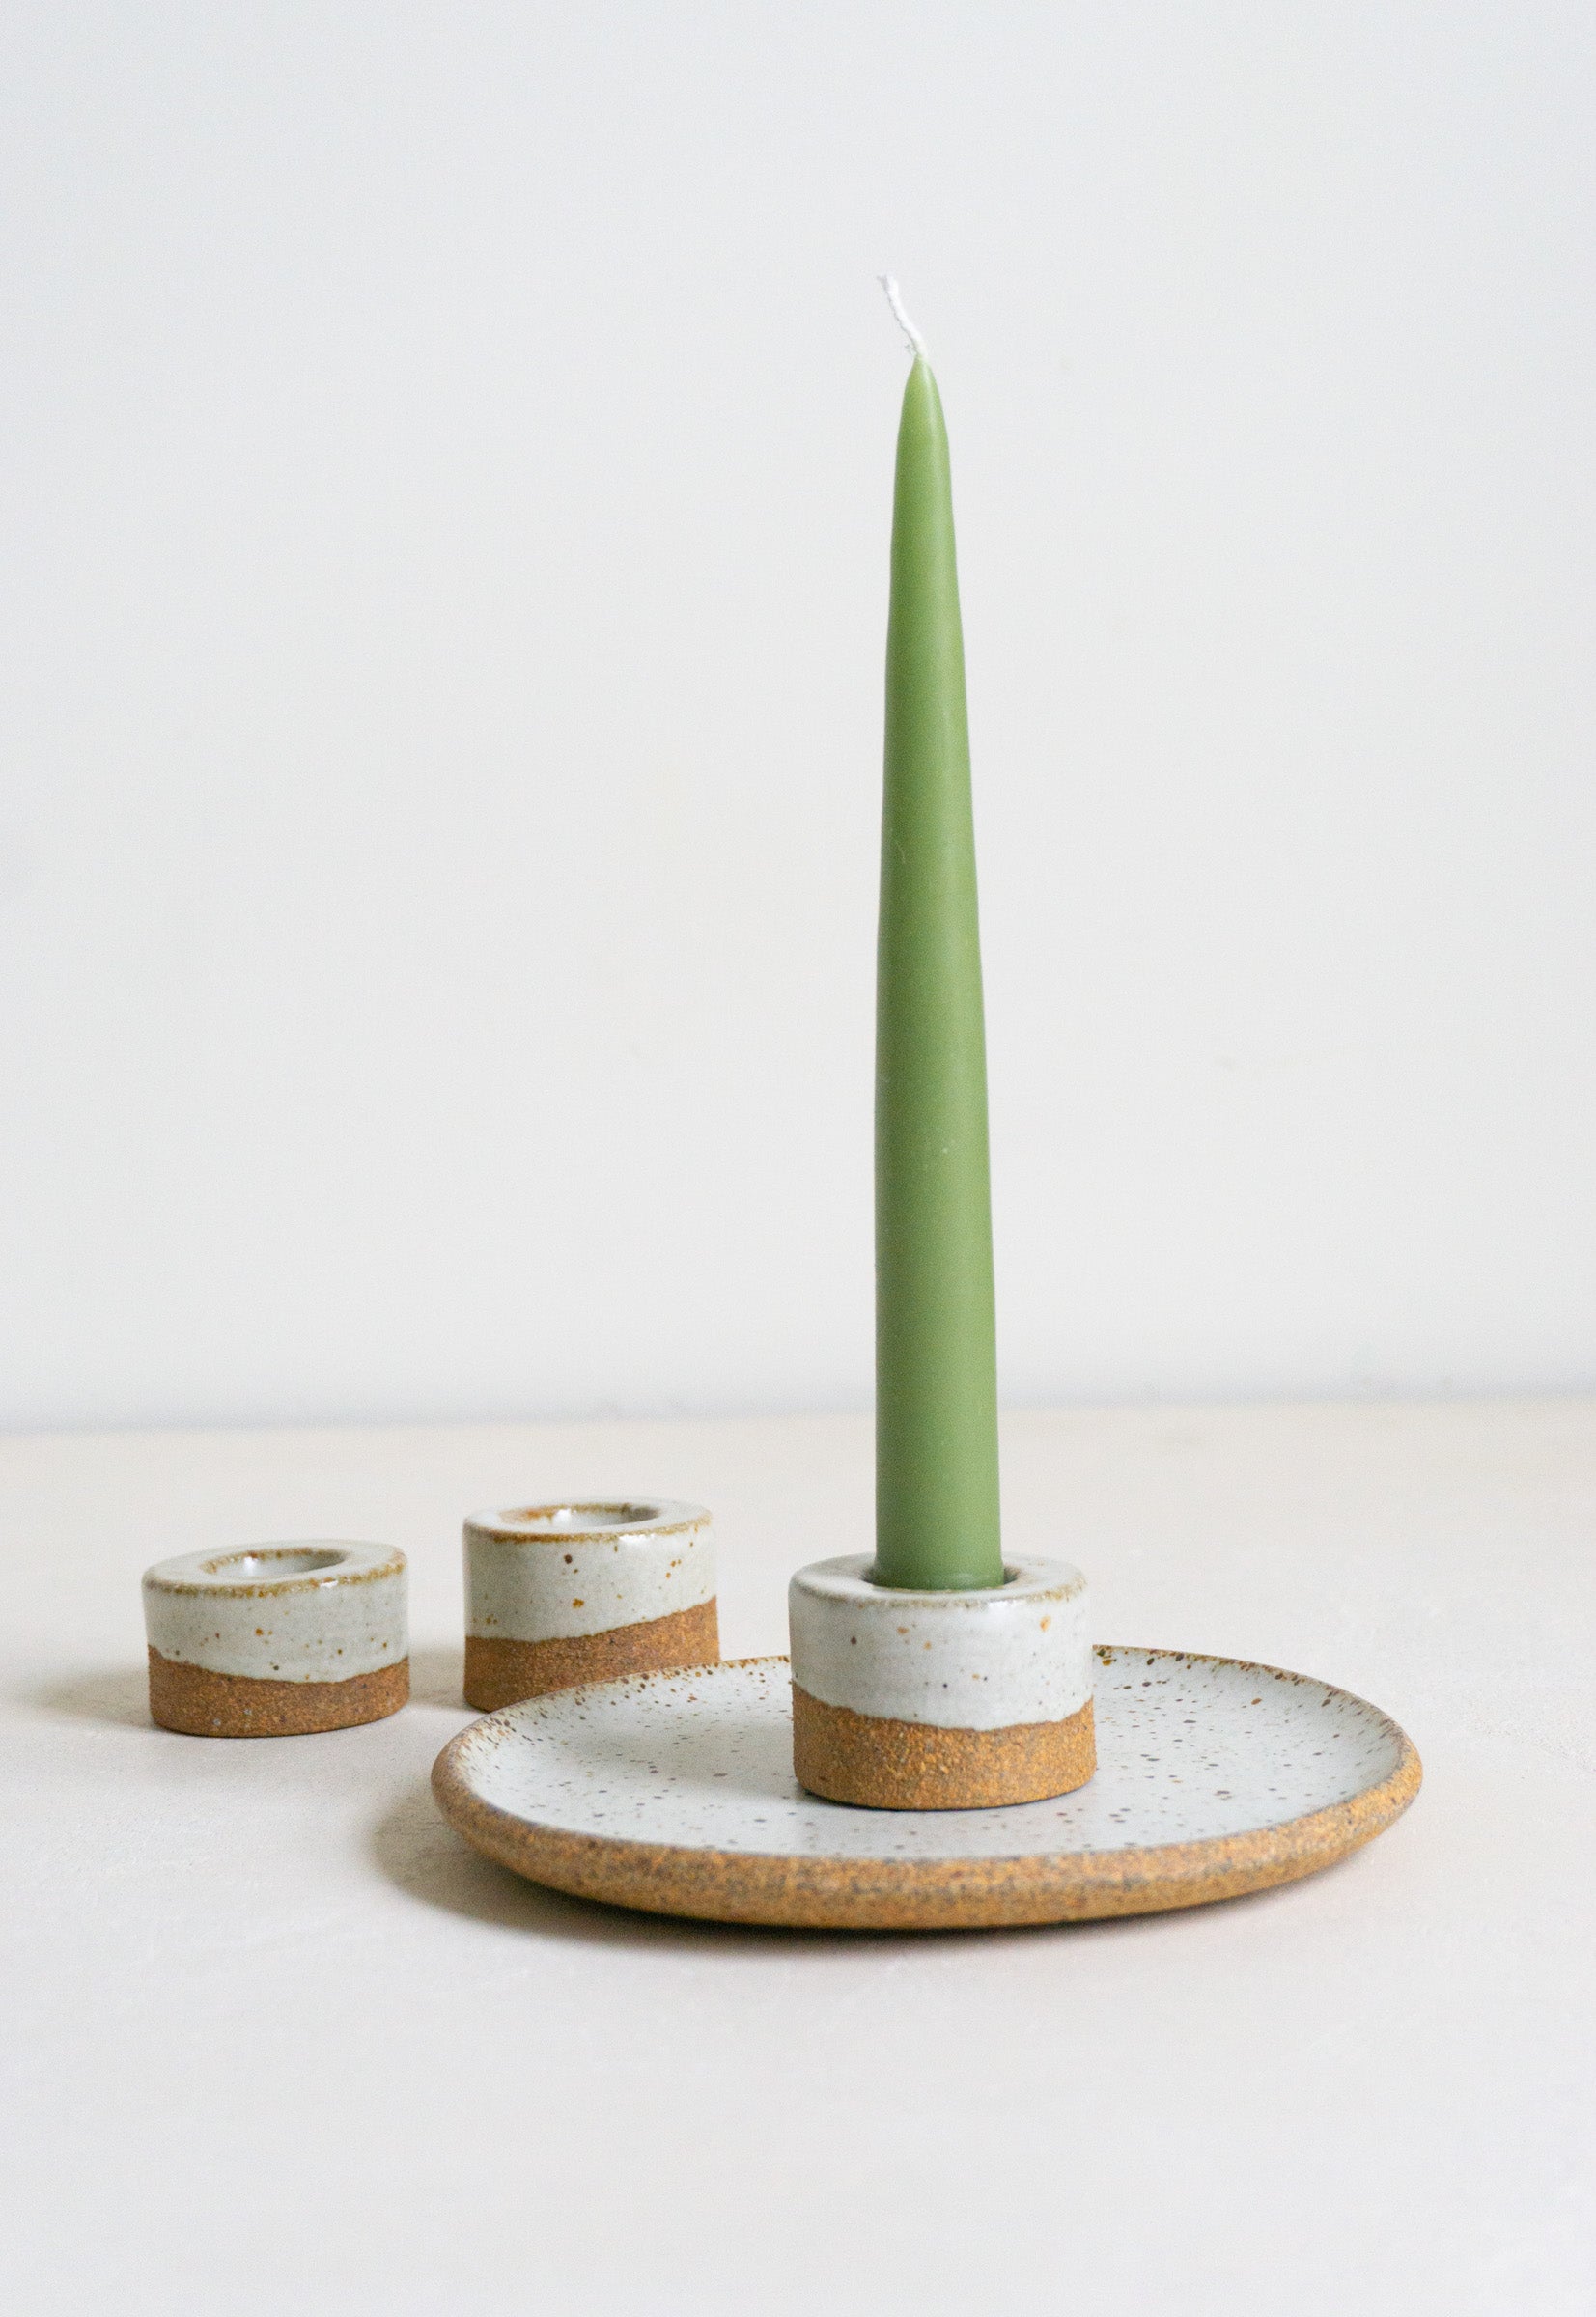 Mani Candle Holder in Sandstone and White